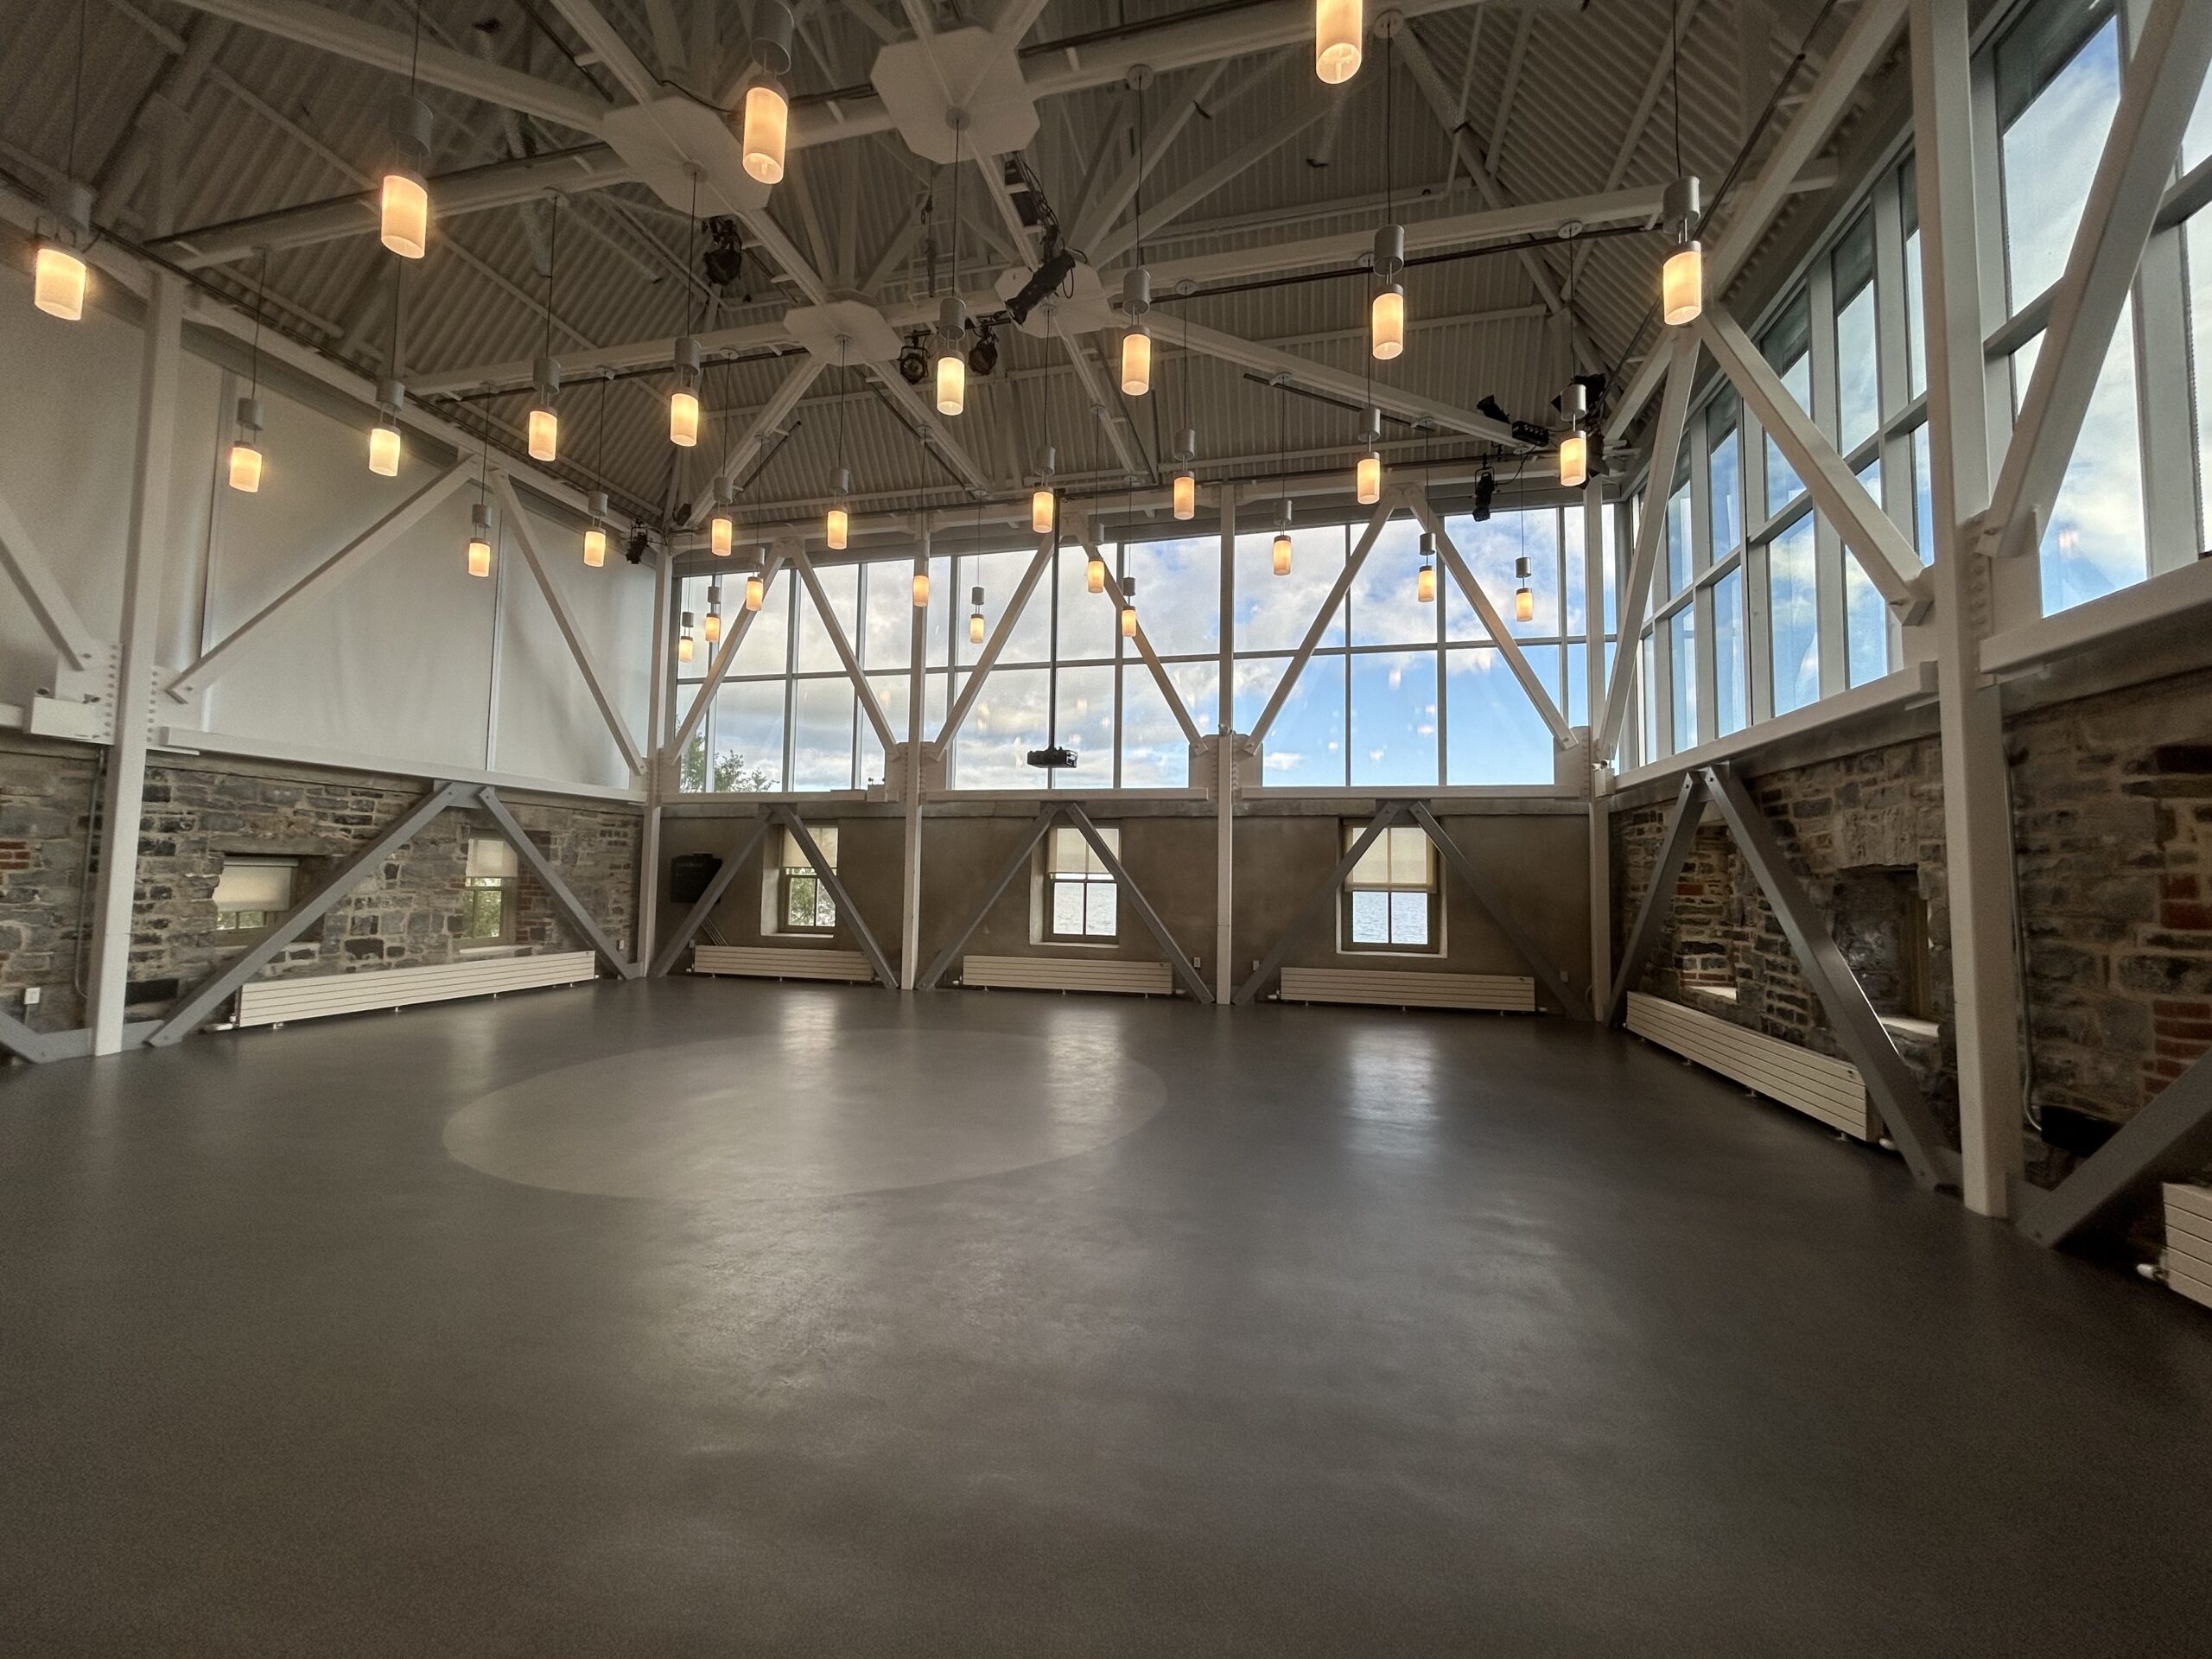 Malting Tower [large open event space with no furniture, bright with natural light coming through large surrounding windows, blinds closed on east side, high industrial vaulted ceilings with hanging light fixtures, support beams throughout the space with sections of limestone and concrete walls]